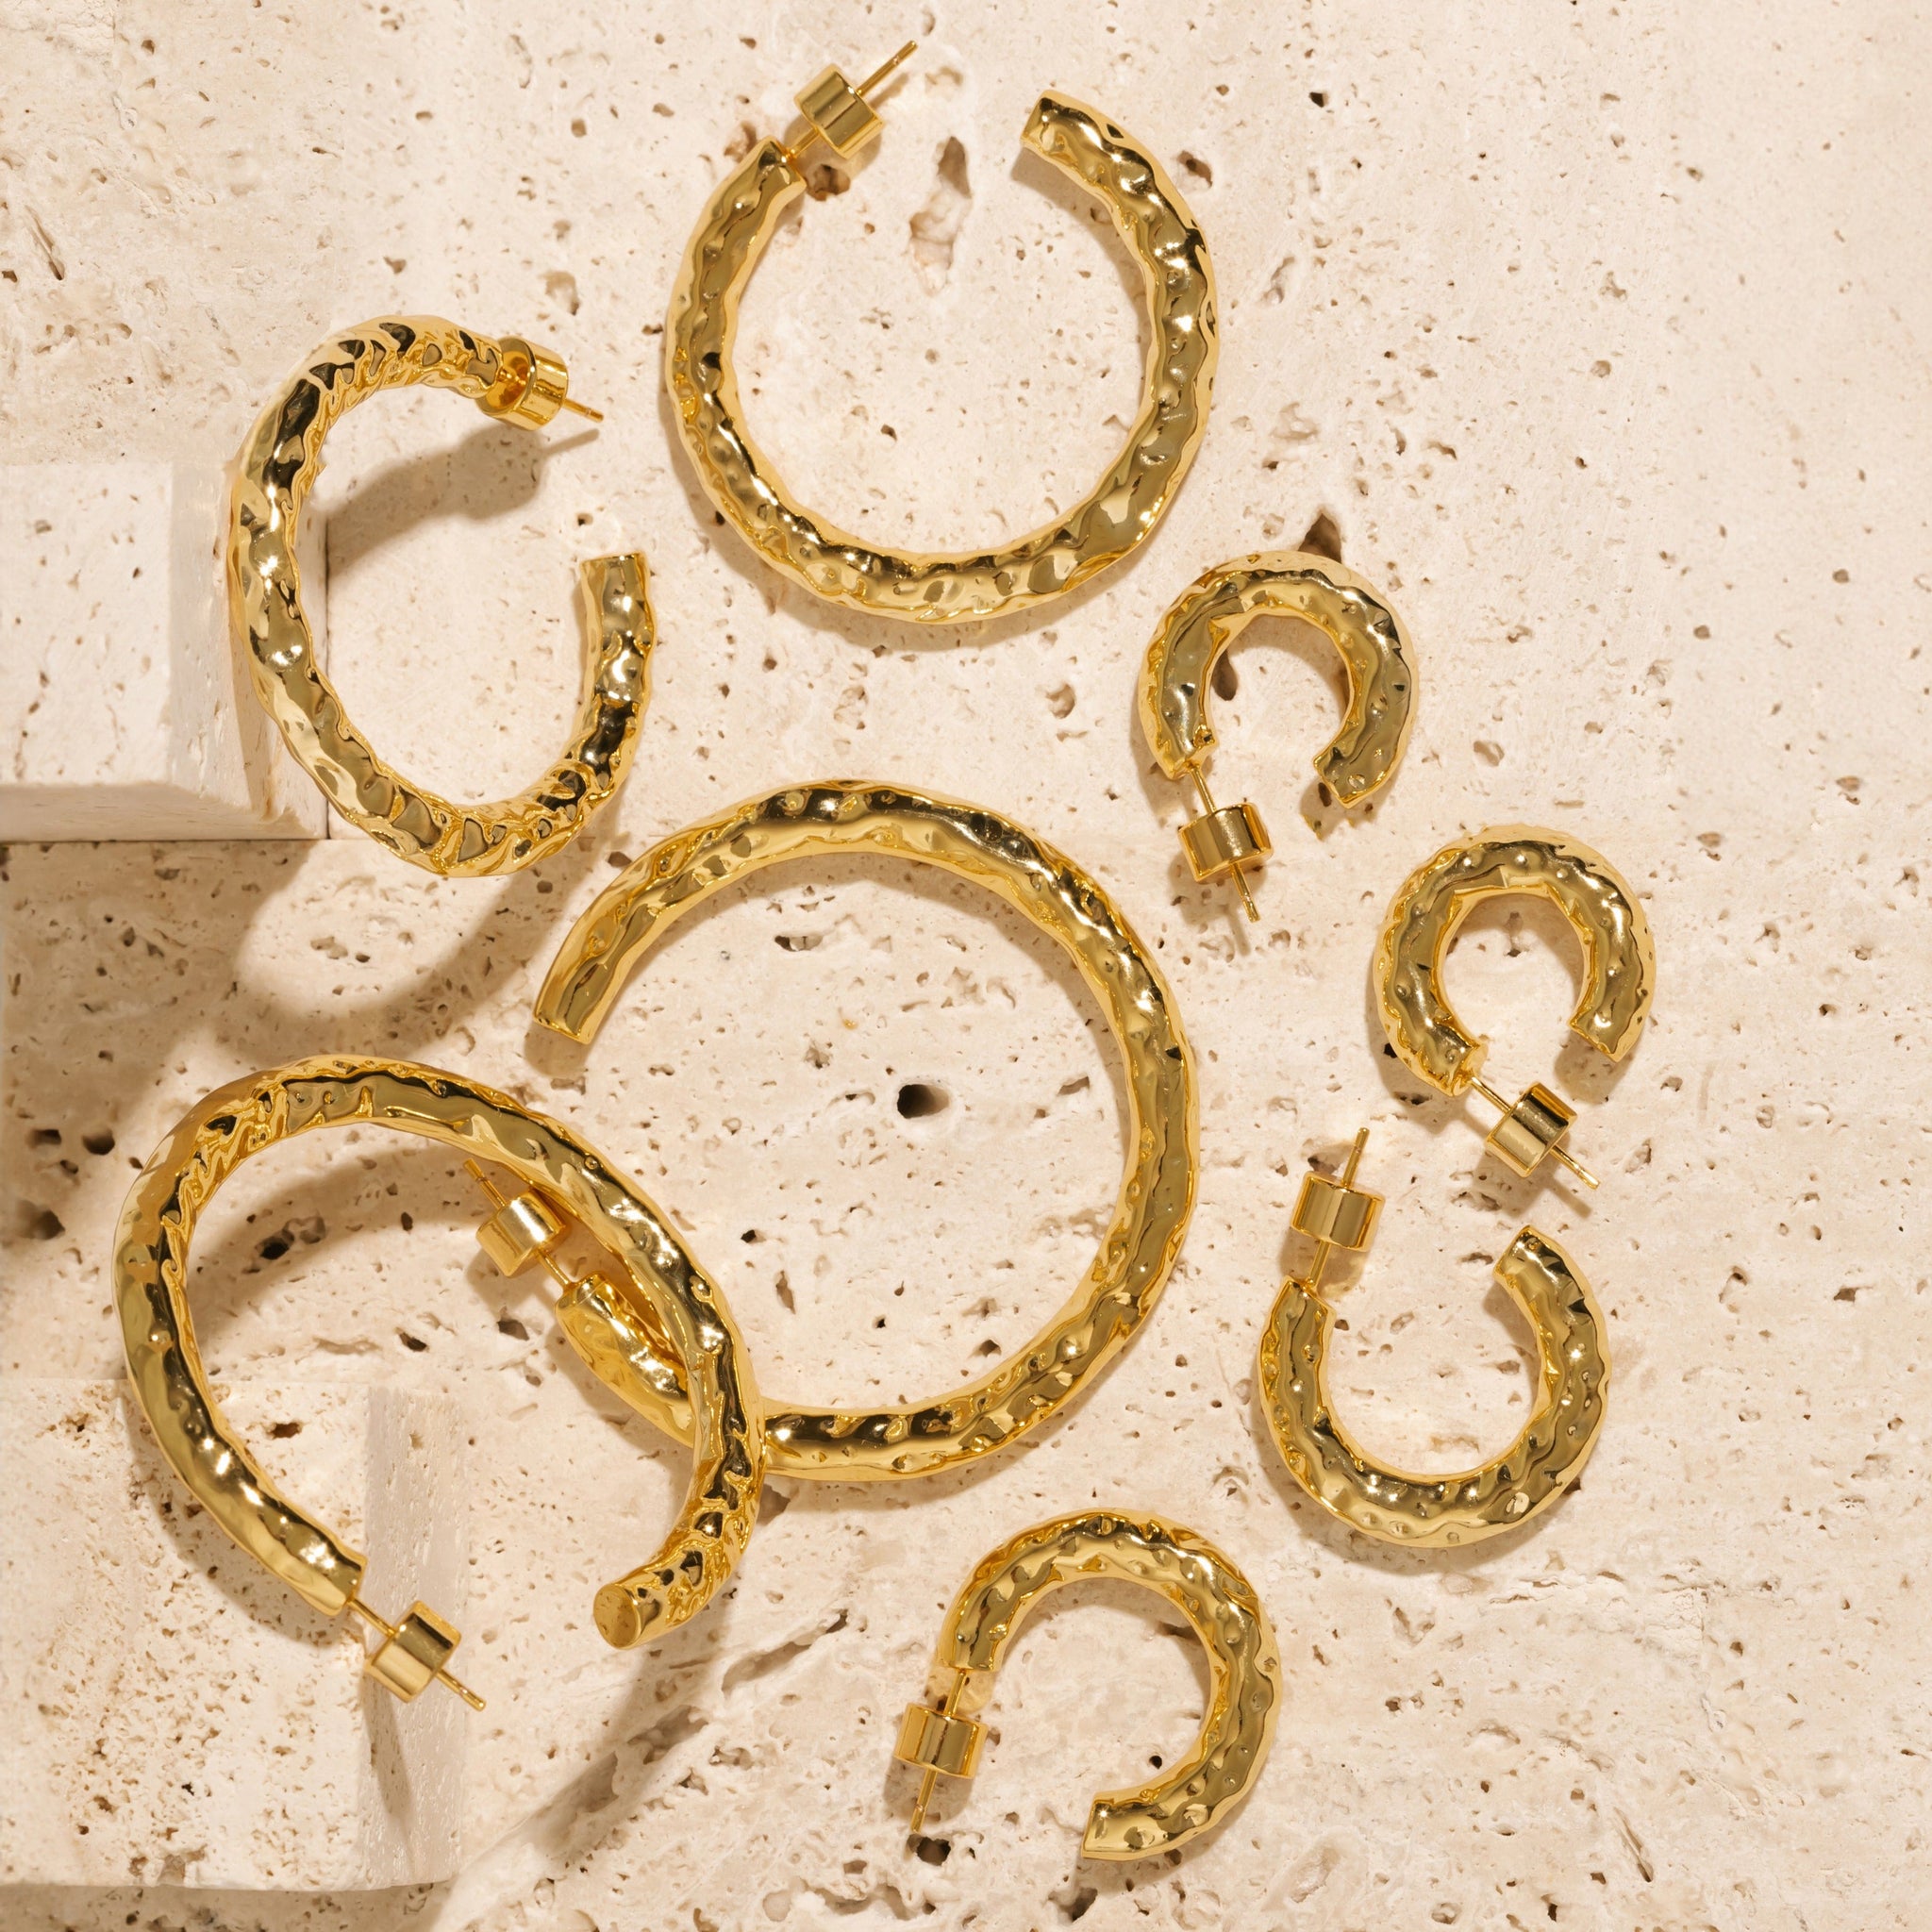 The four pairs of earrings in the Marbella Hoop Quattro set lay together on a porous stone slab to display their hammered texture and open hoop design. 